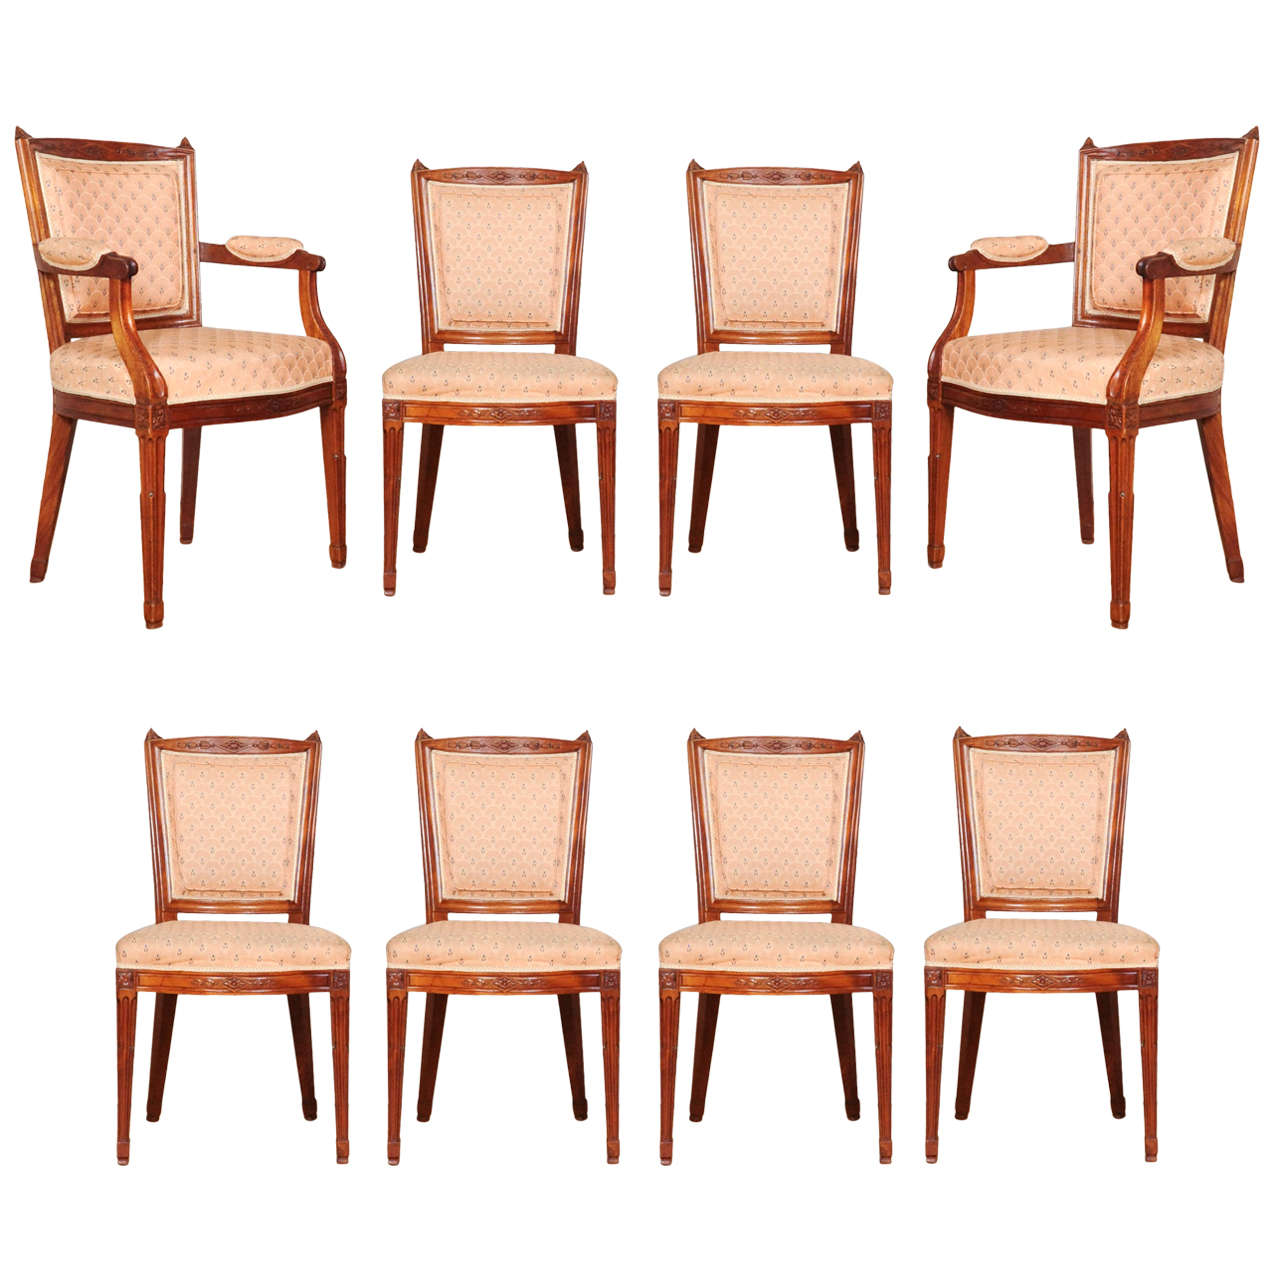 A set of 8 Dutch mahogany dining chairs, circa 1800 For Sale